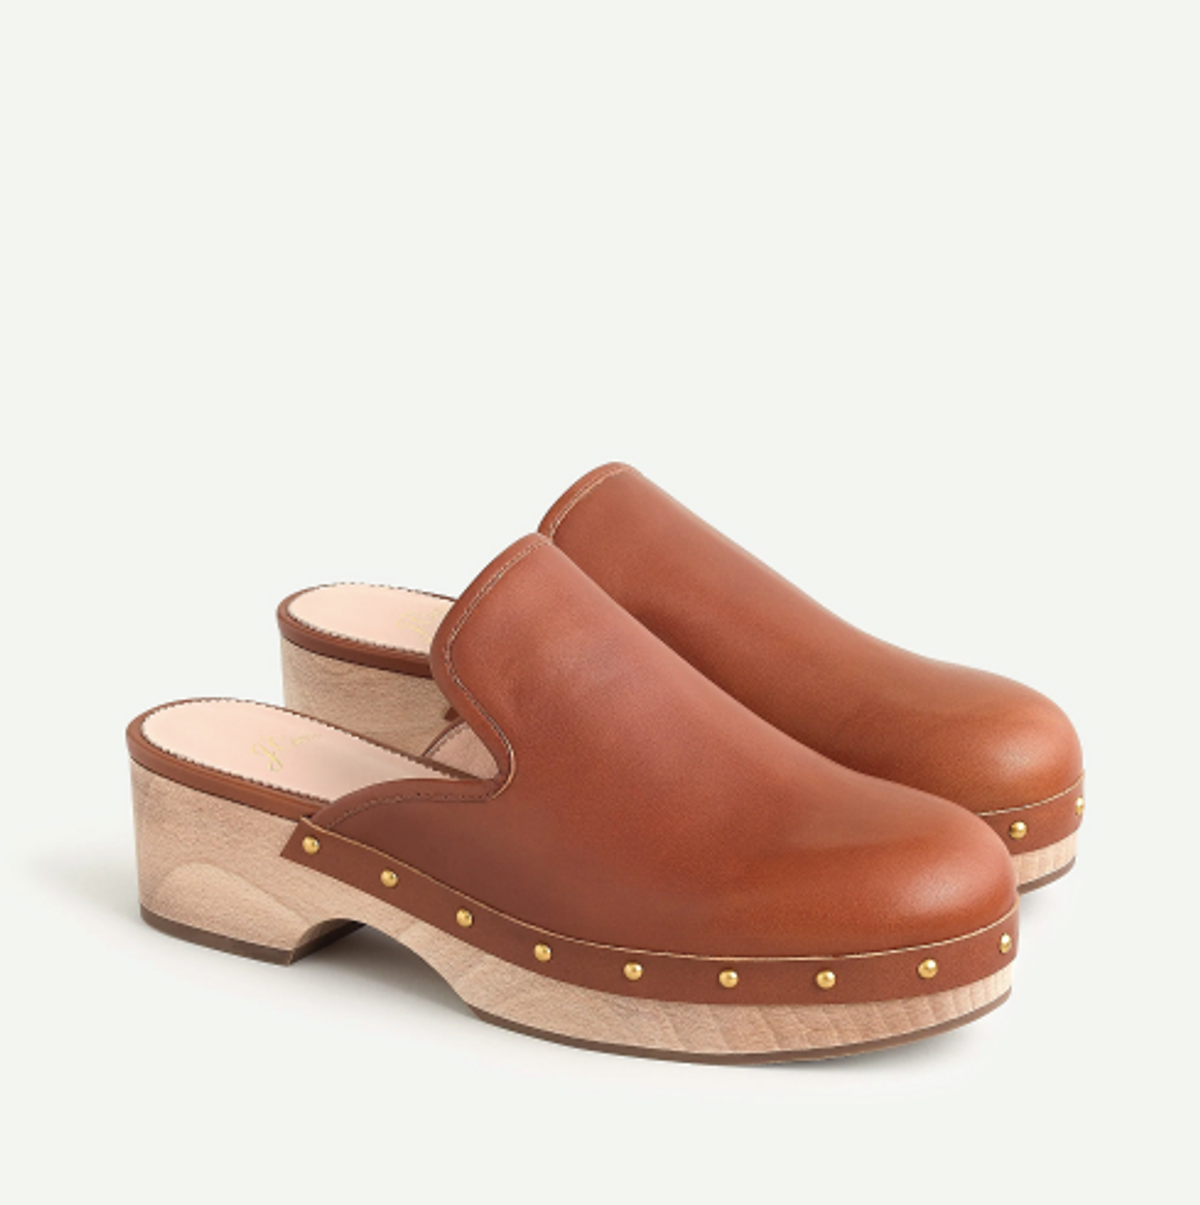 Leather Clogs